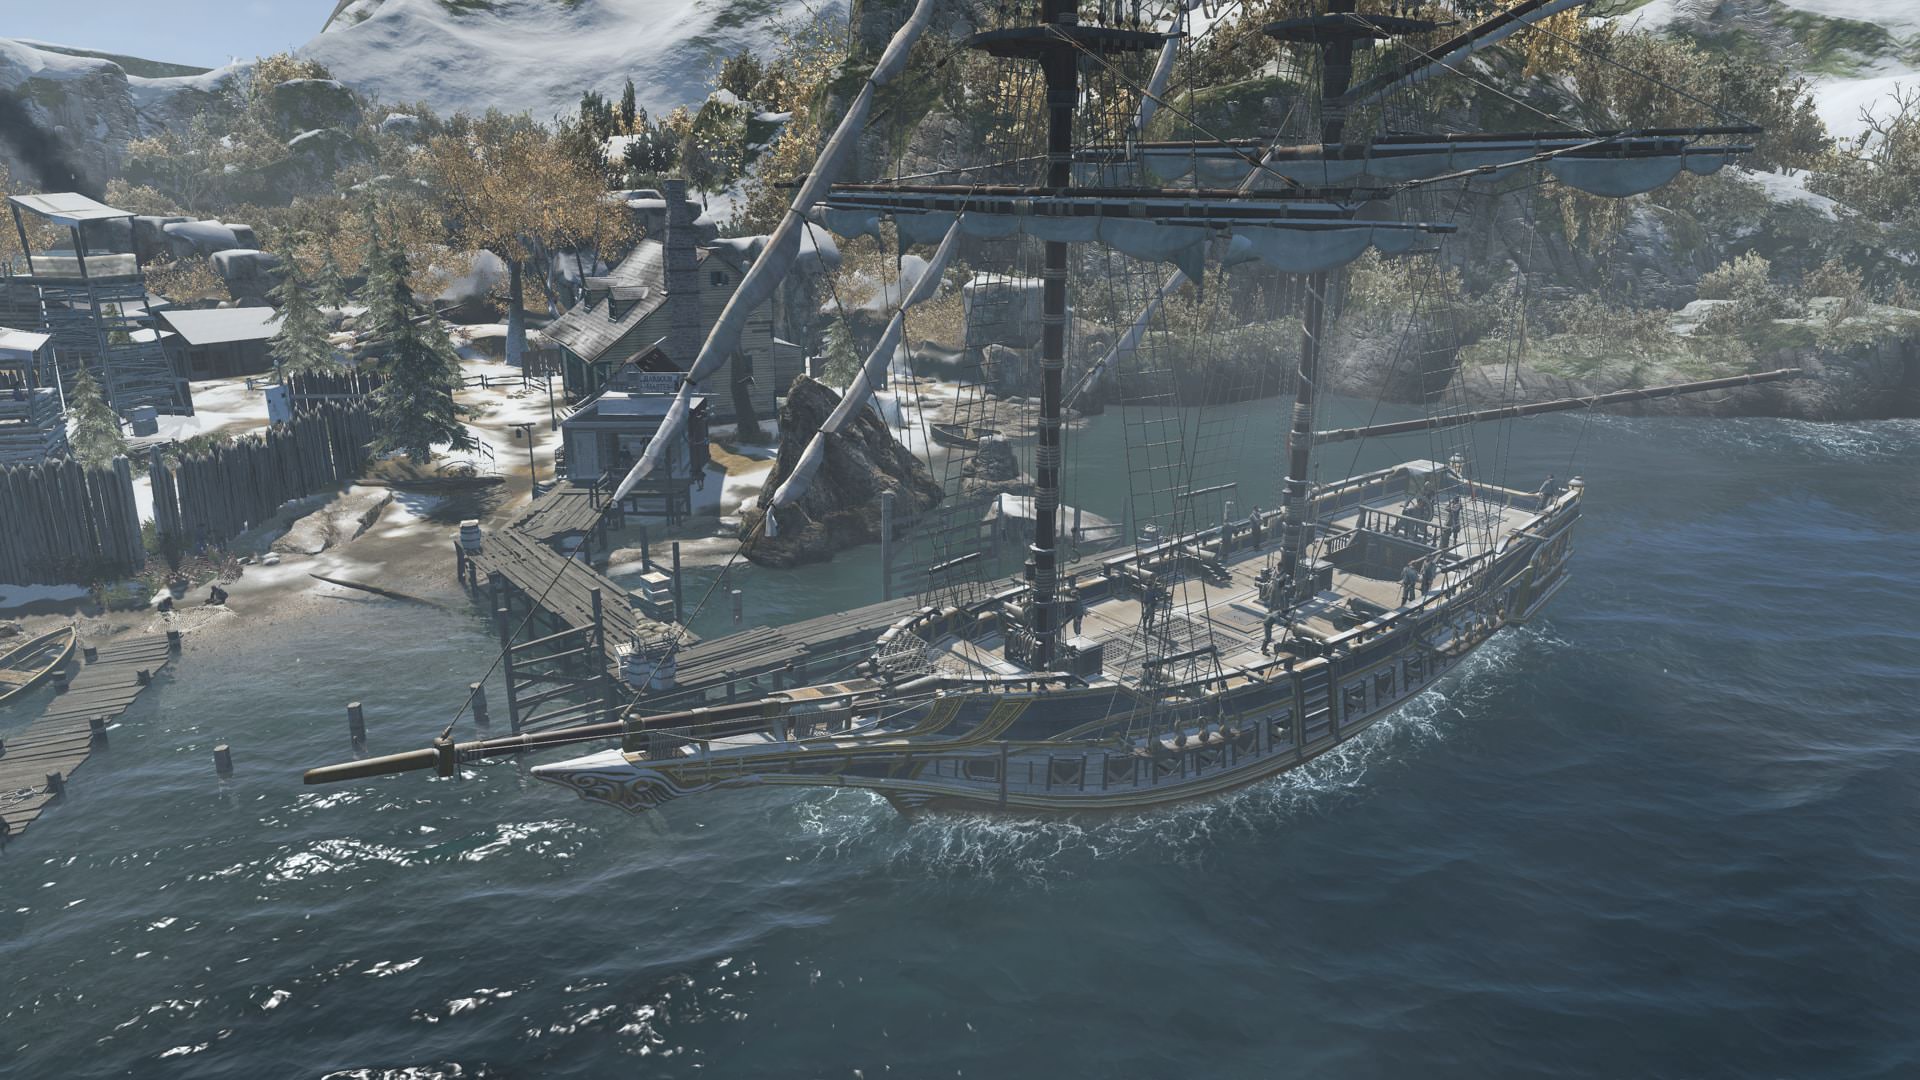 Assassins Creed: Rogue will not be coming to Xbox One or PS4